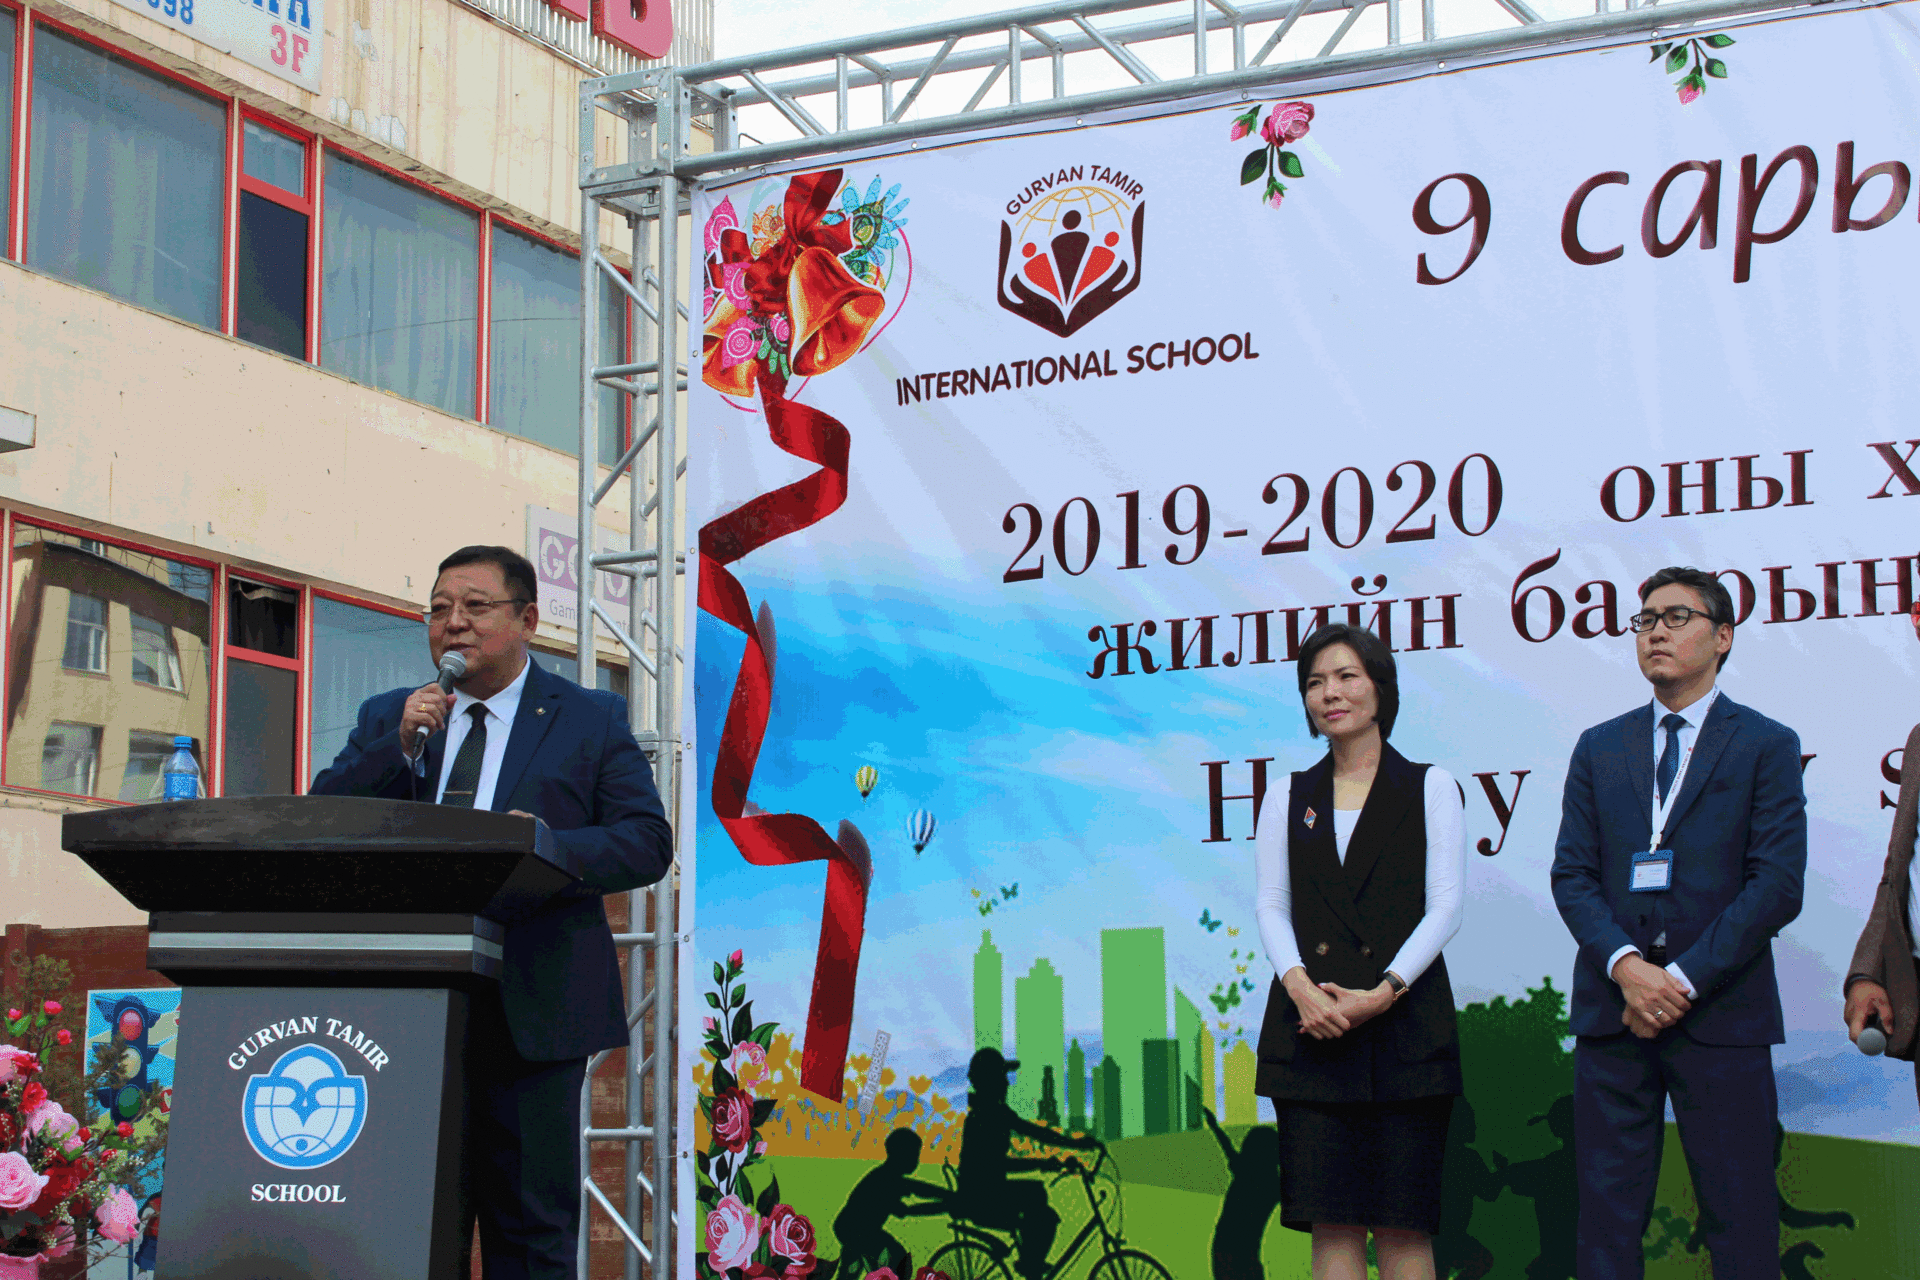 OPENING CEREMONY FOR THE NEW SCHOOL YEAR 2019-2020